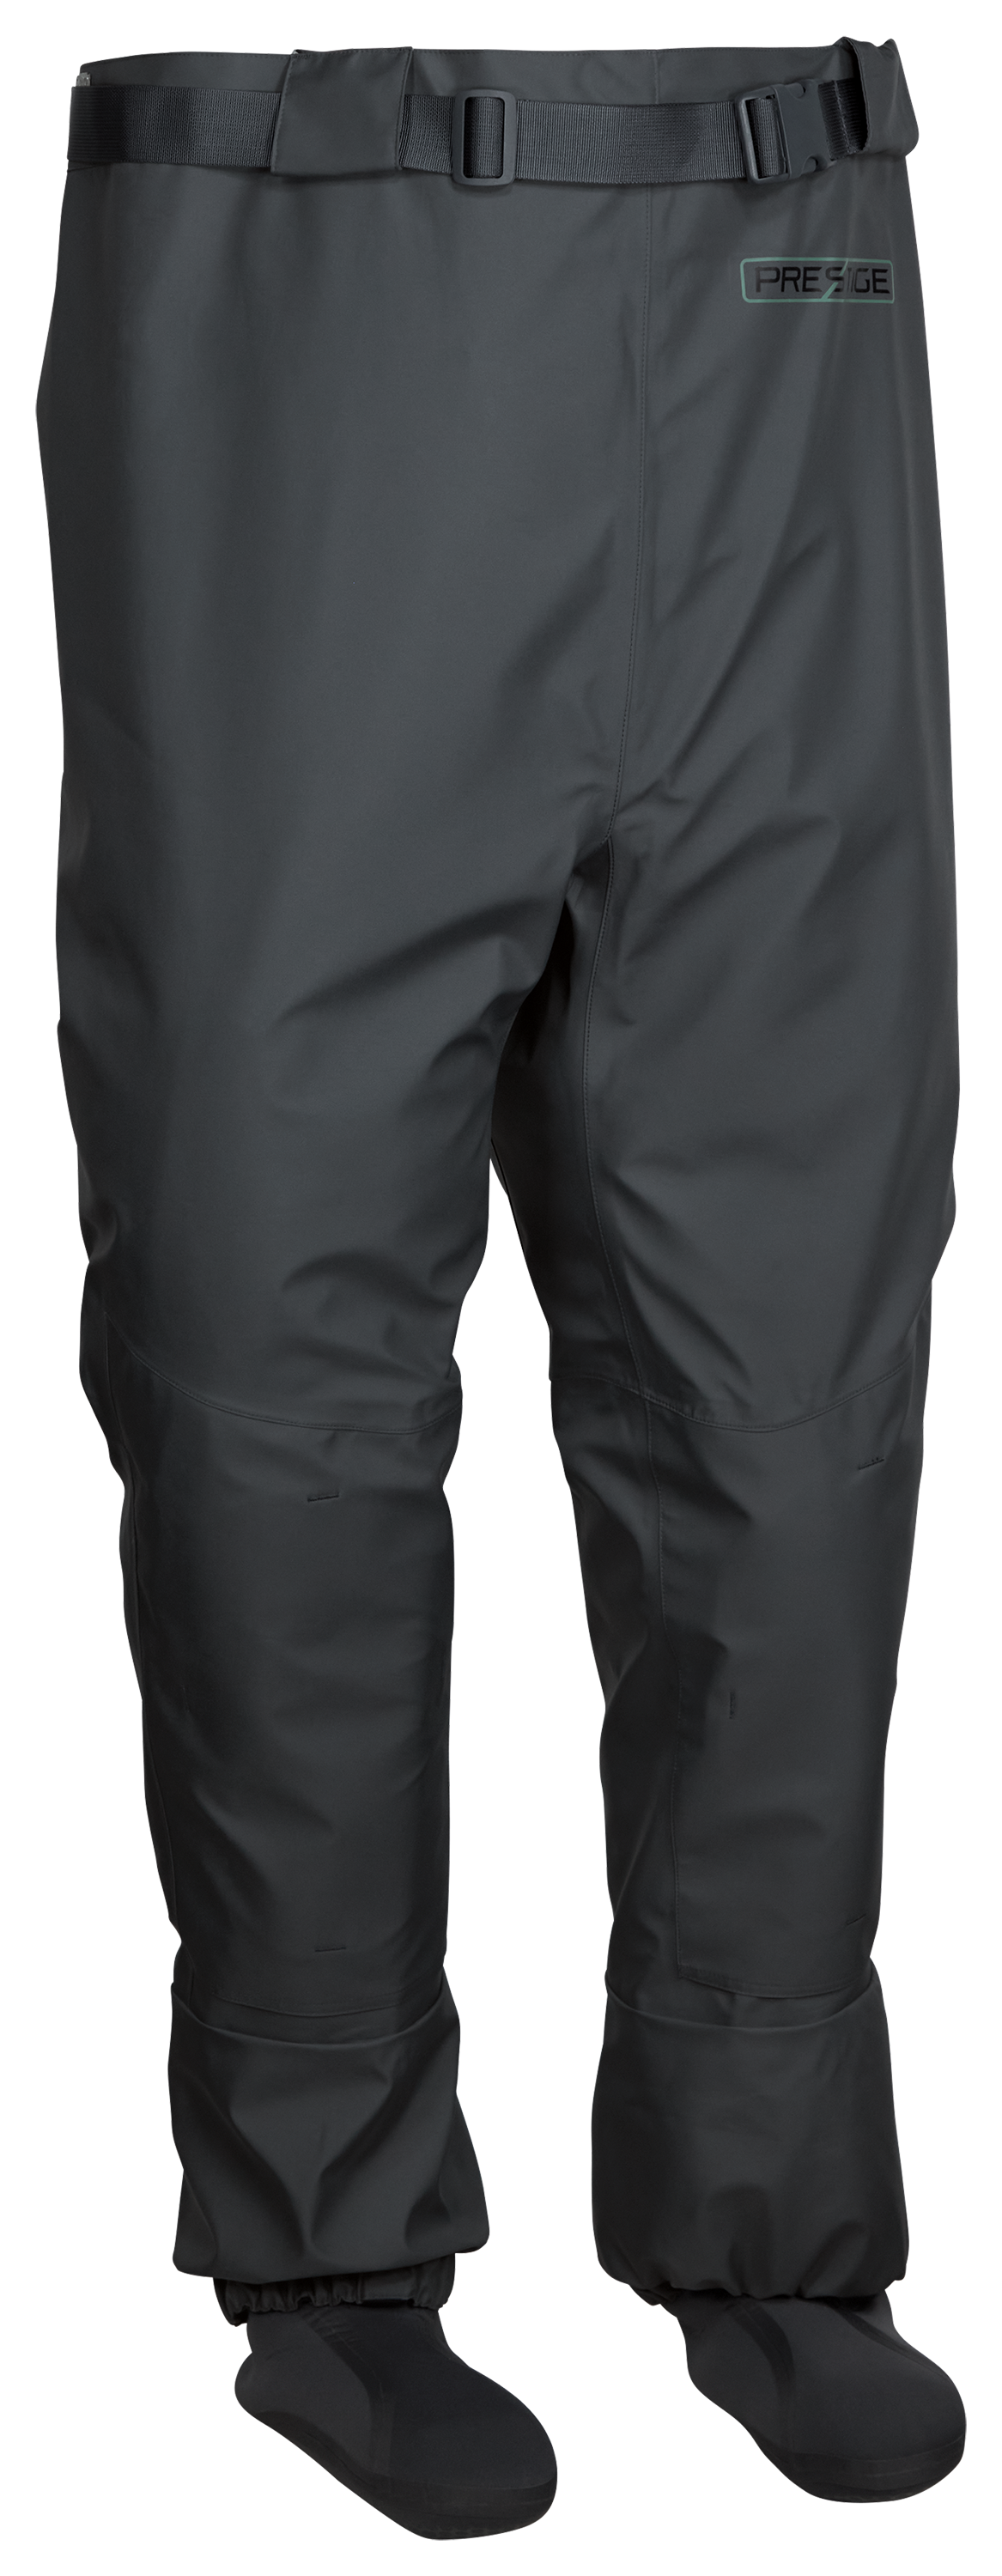 White River Fly Shop Prestige Waist Waders for Men - Cool Grey - Small